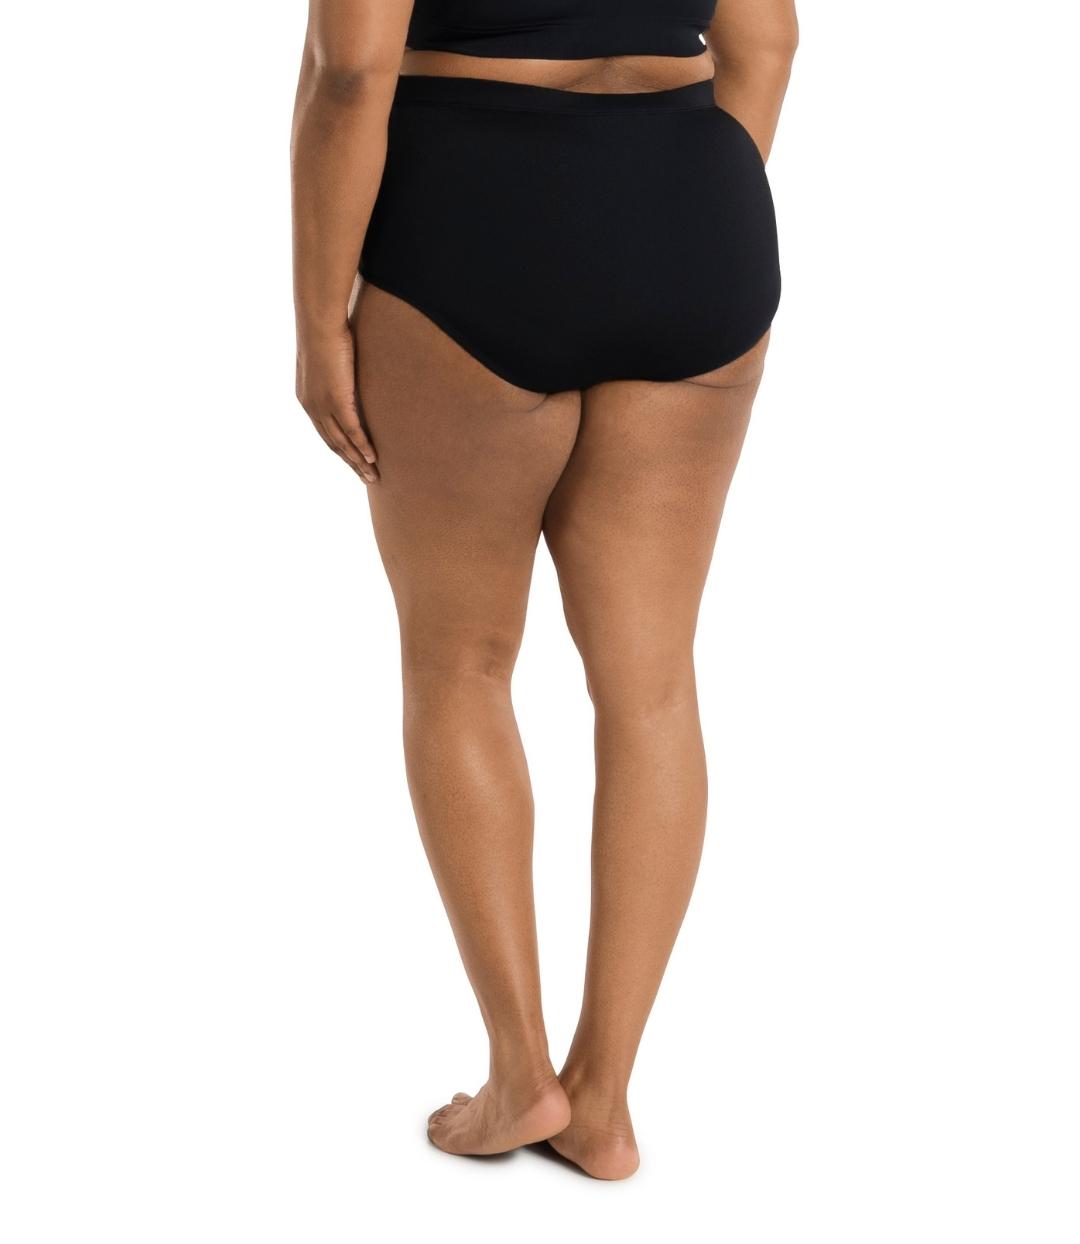 Plus size woman, back view, wearing AquaSport Swim Brief Black. Conservative leg opening and full bottom coverage. 